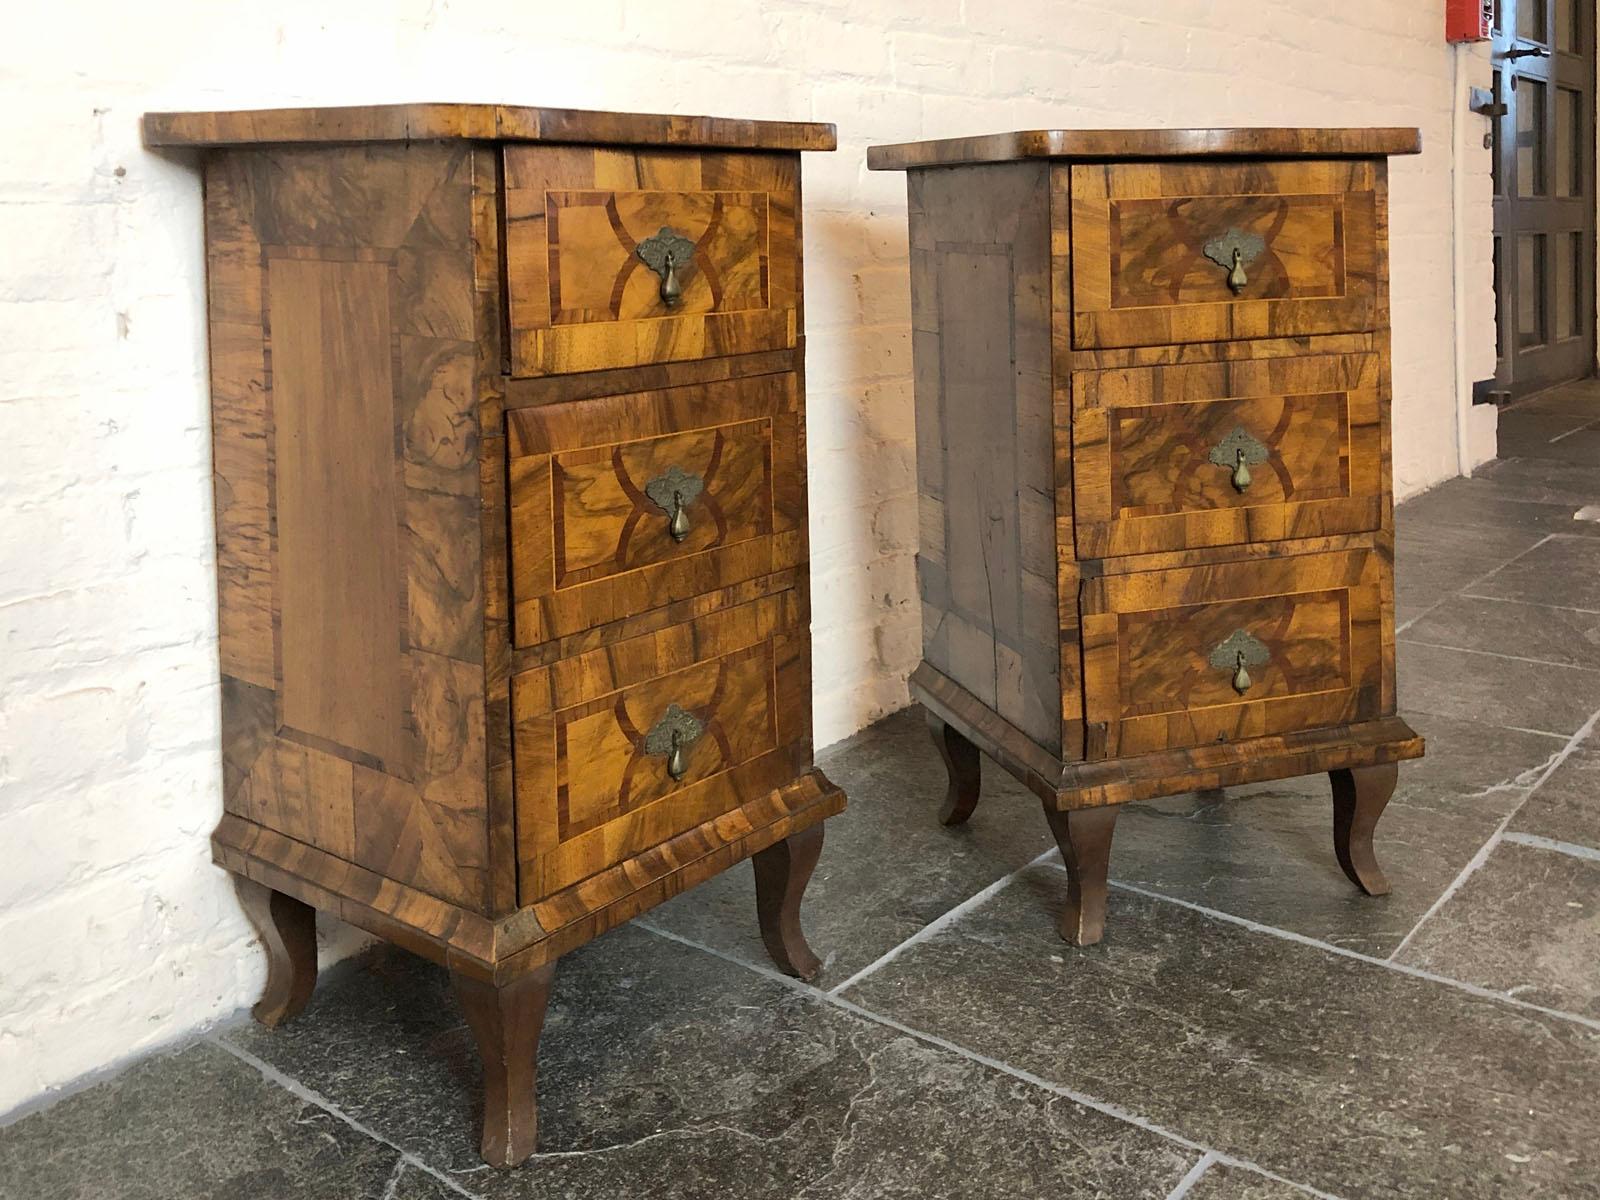 Pair of diminutive Italian Neoclassical Comodini or night stands, the walnut veneer with a rich, deep patina, shaped tops over three drawers, on cabriole legs. Elegant, petit, understated, with a beautiful color, they make a perfect fit for a small